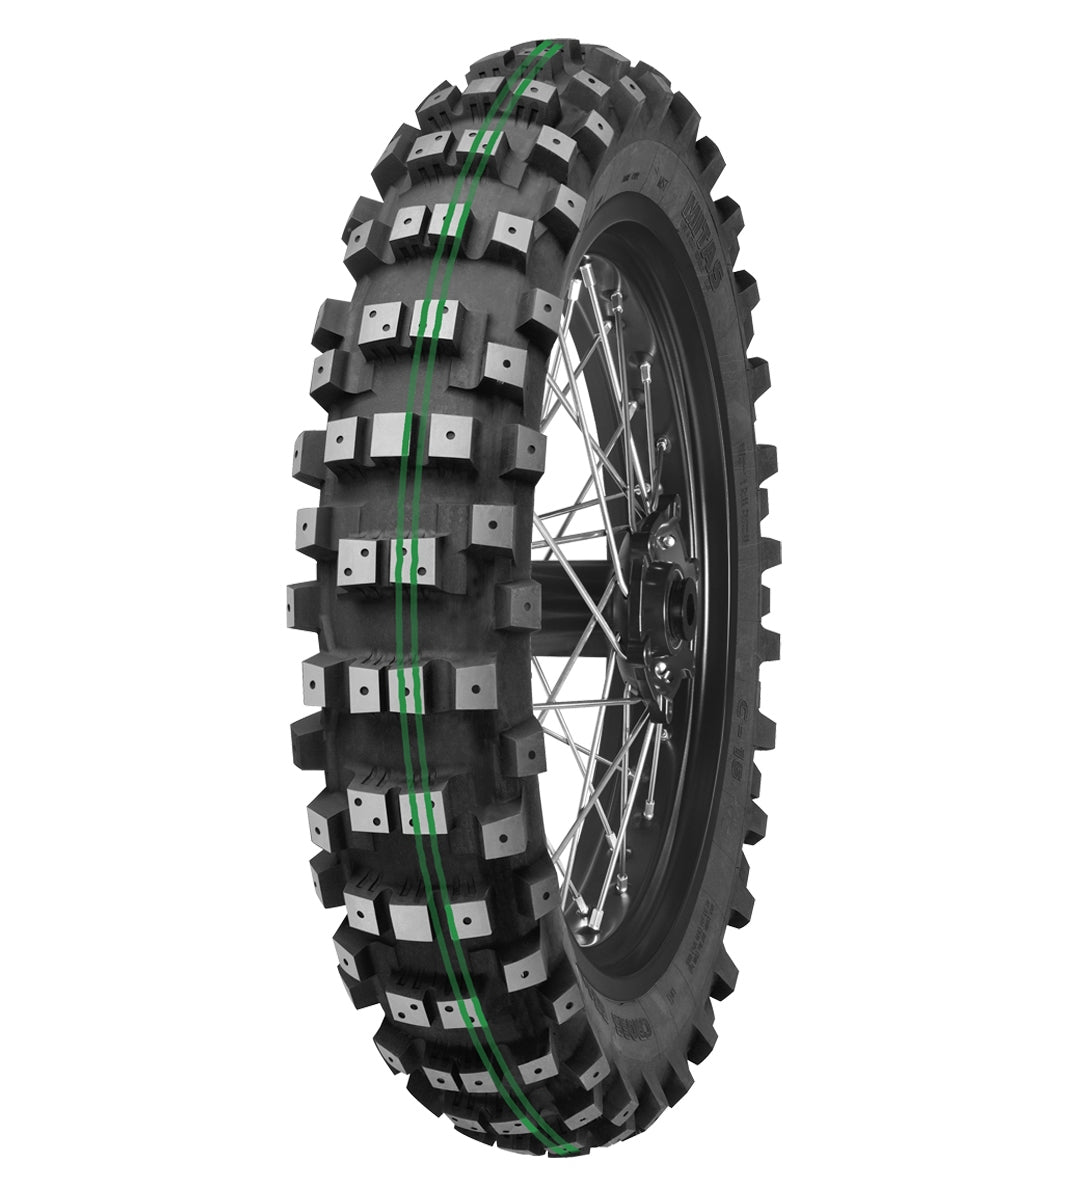 Mitas C-16 STONEATER 110/100-18 Enduro Competition Off-Road SUPER SOFT EXTREME 64M 2 Green Tube Rear Tire, 226457, 110/100-18, C-16 StonEater, Enduro, Enduro Competition, Off-Road, Rear, Tires - Imported and distributed in North & South America by Lindeco Genuine Powersports - Premier Powersports Equipment and Accessories for Motorcycle Enthusiasts, Professional Riders and Dealers.